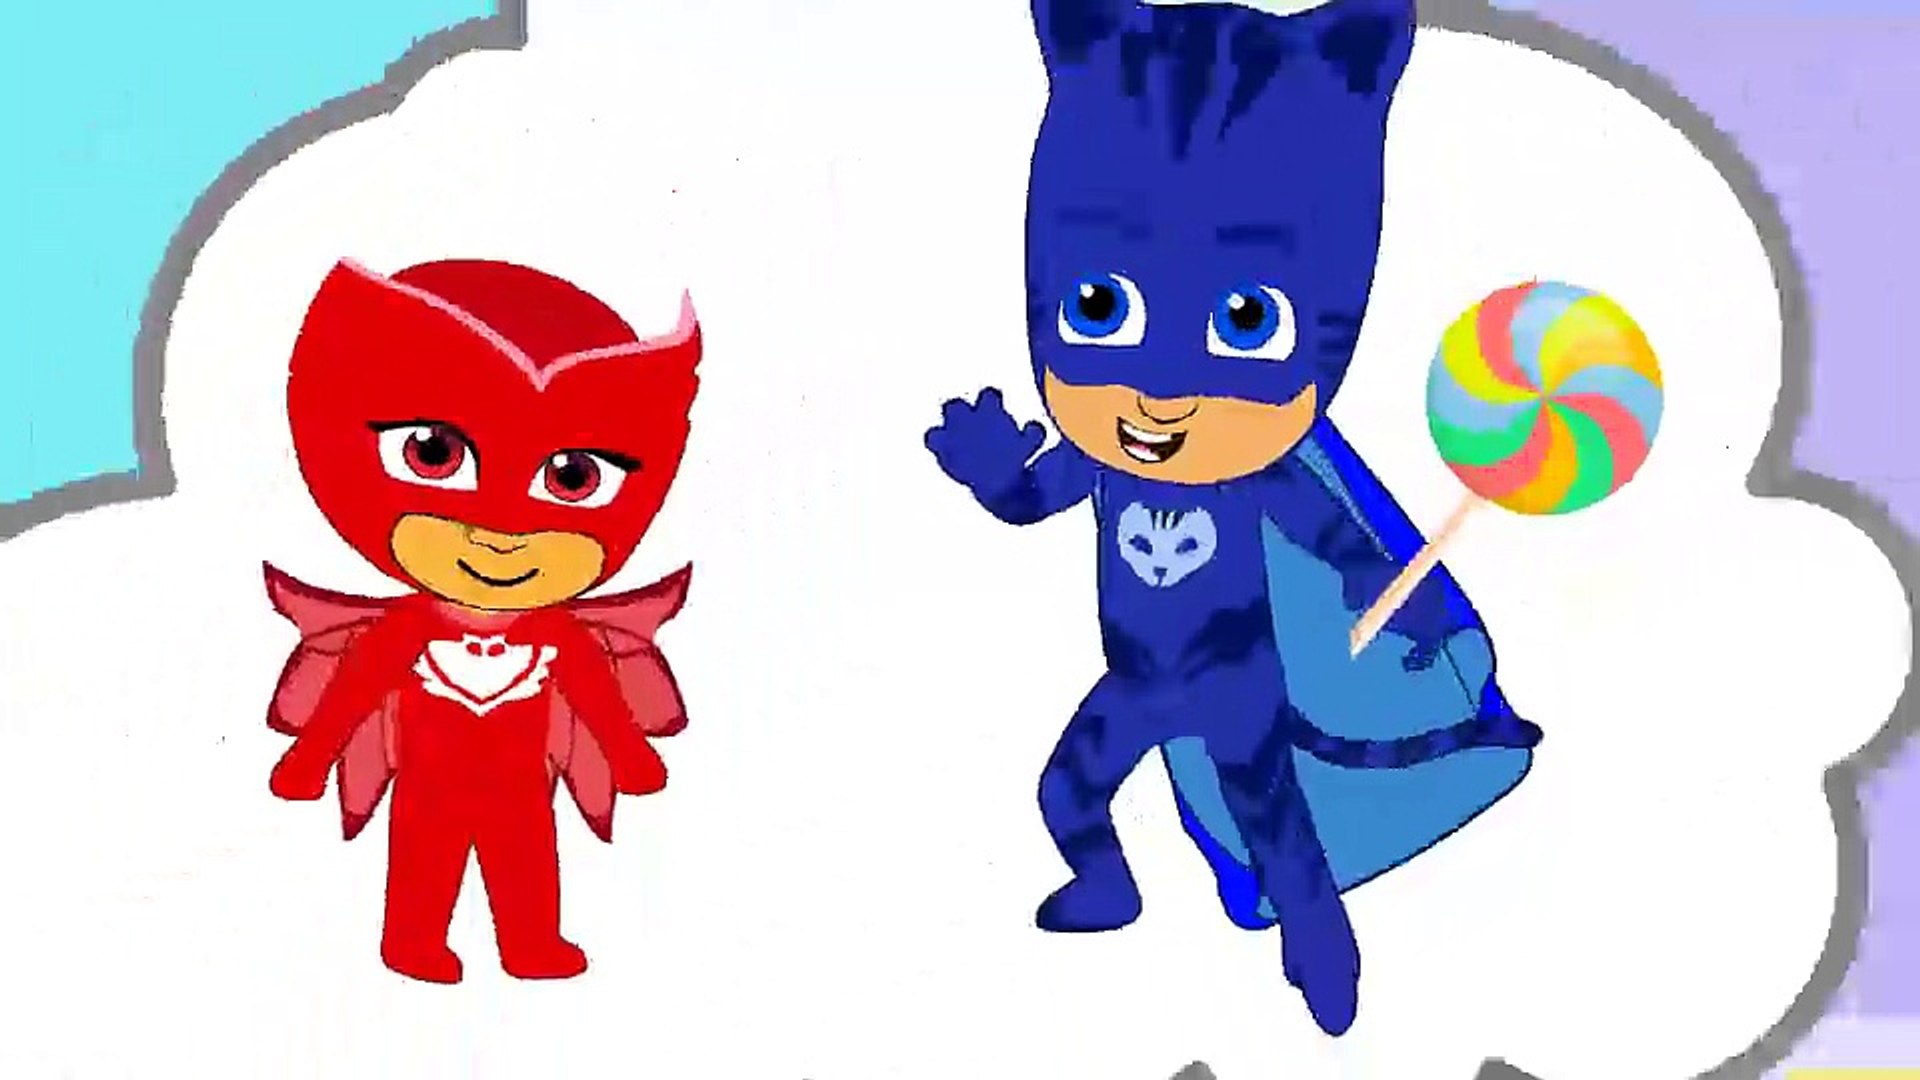 Pj Masks Catboy Candy Donated Owlette But Found Romeo Kissing Catboy Crying Love Funny Story Movie For Kids Finger Song Video Dailymotion